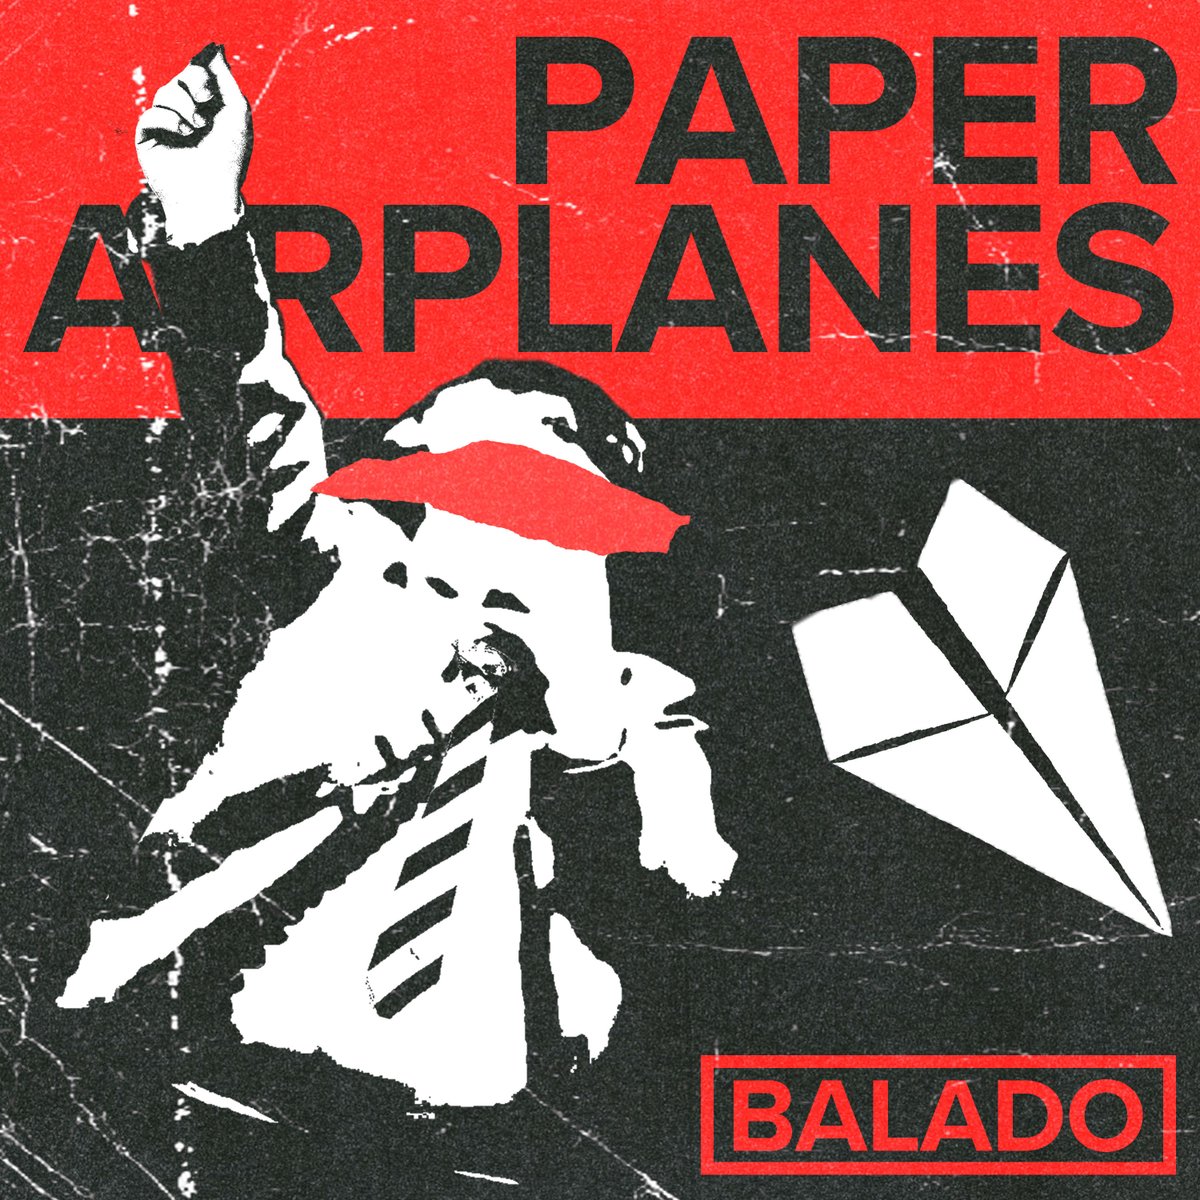 Glasgow's @Balado_band recently released their new single 'Paper Airplanes. This tale of nostalgia and resilience is proof that the future is always unwritten. Read all about it here: travellerstunes.com/review/balado-… FFO @TGulps @HazySundaysband @ArcticMonkeys